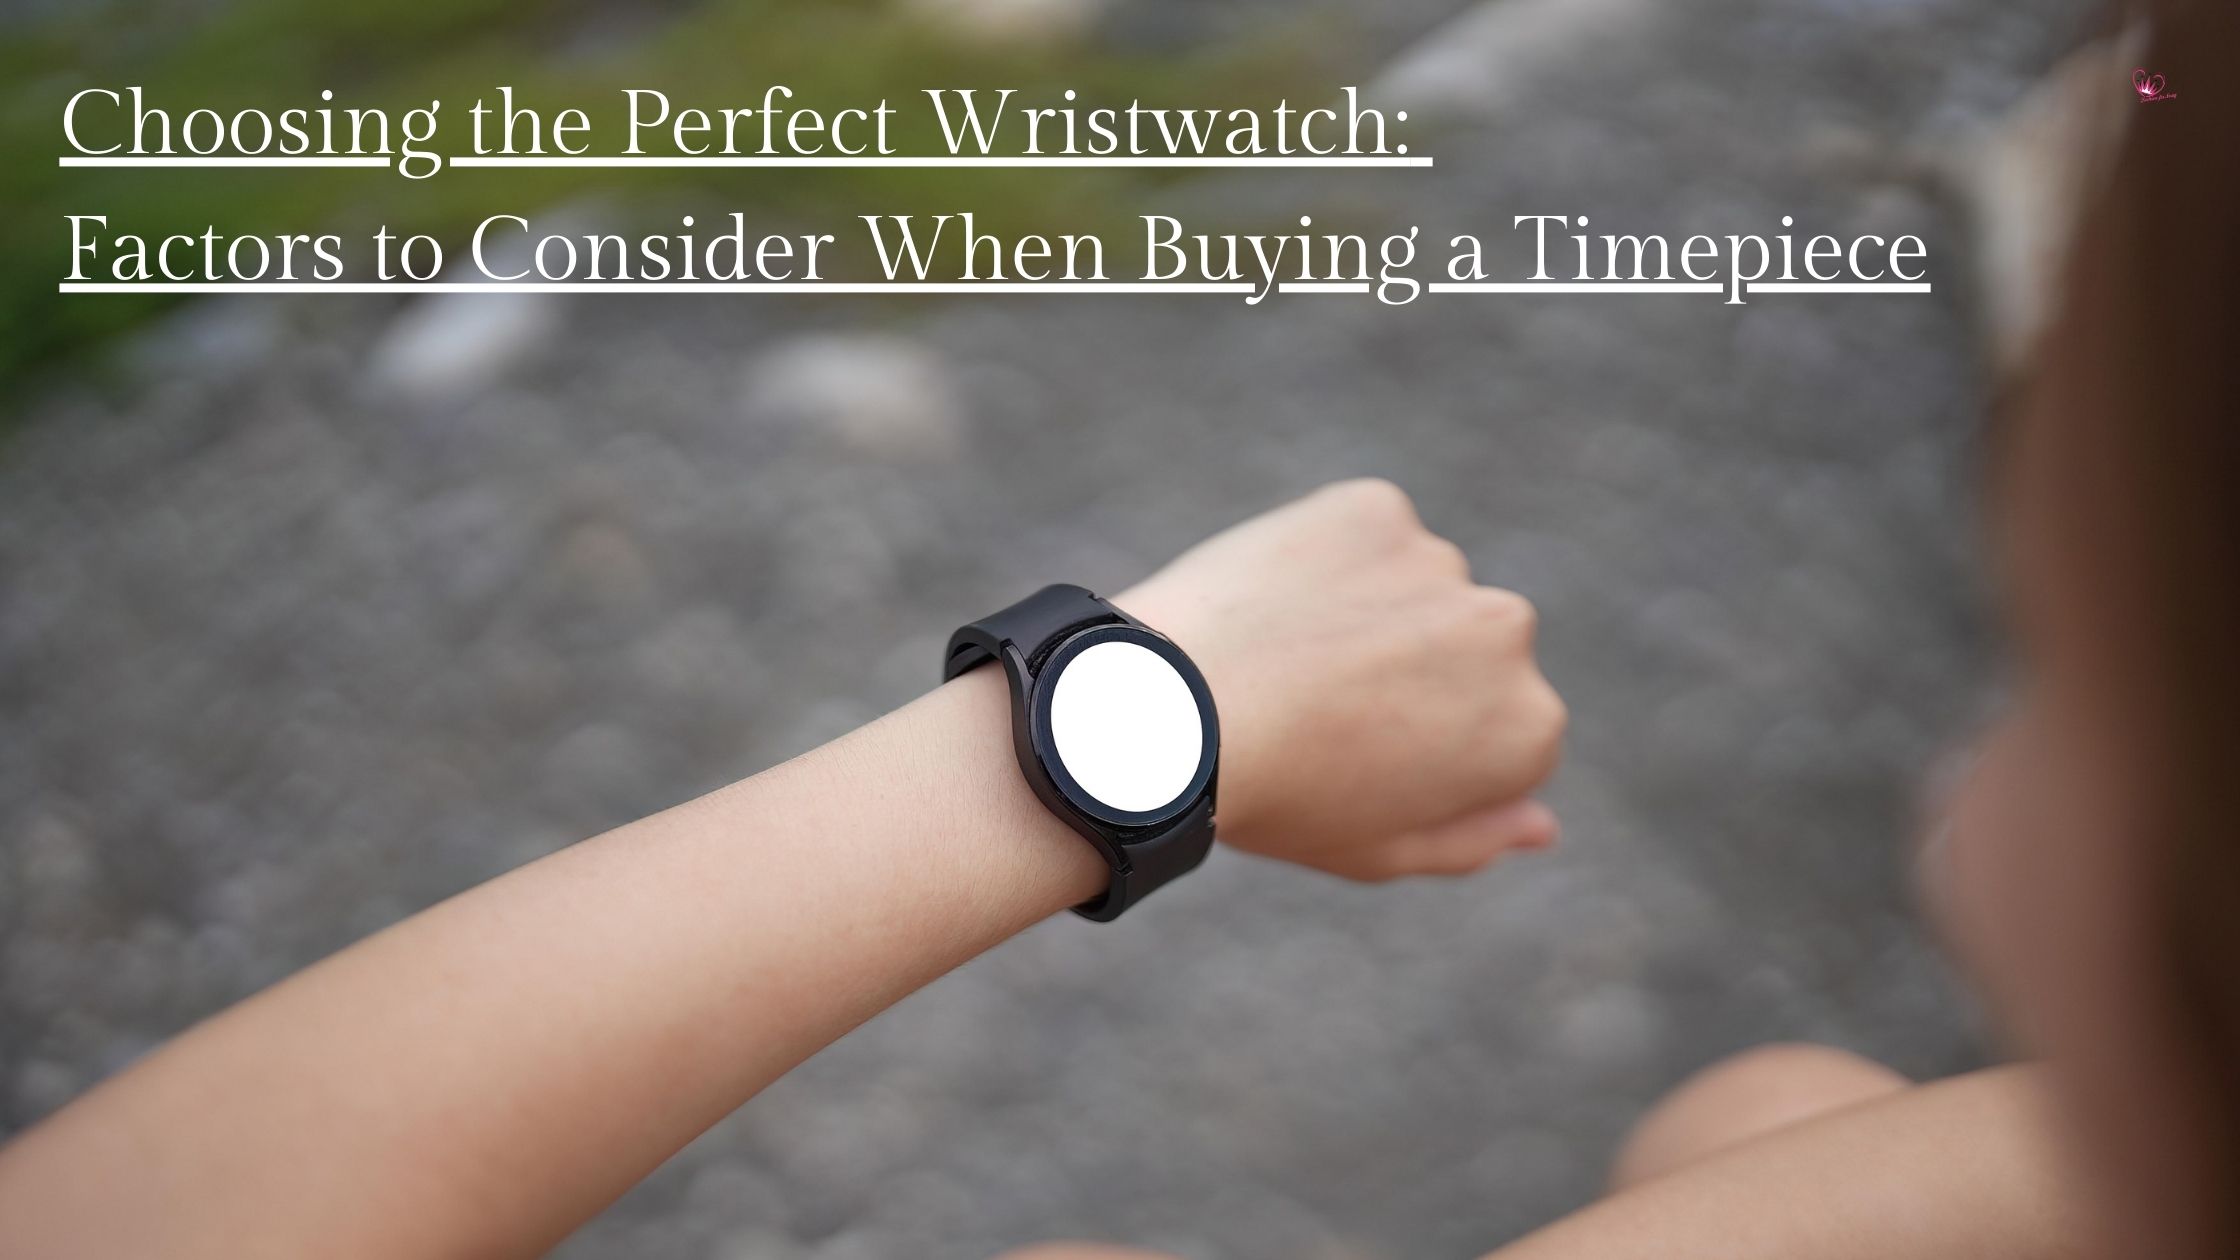 Choosing the Perfect Wristwatch: Factors to Consider When Buying a Timepiece